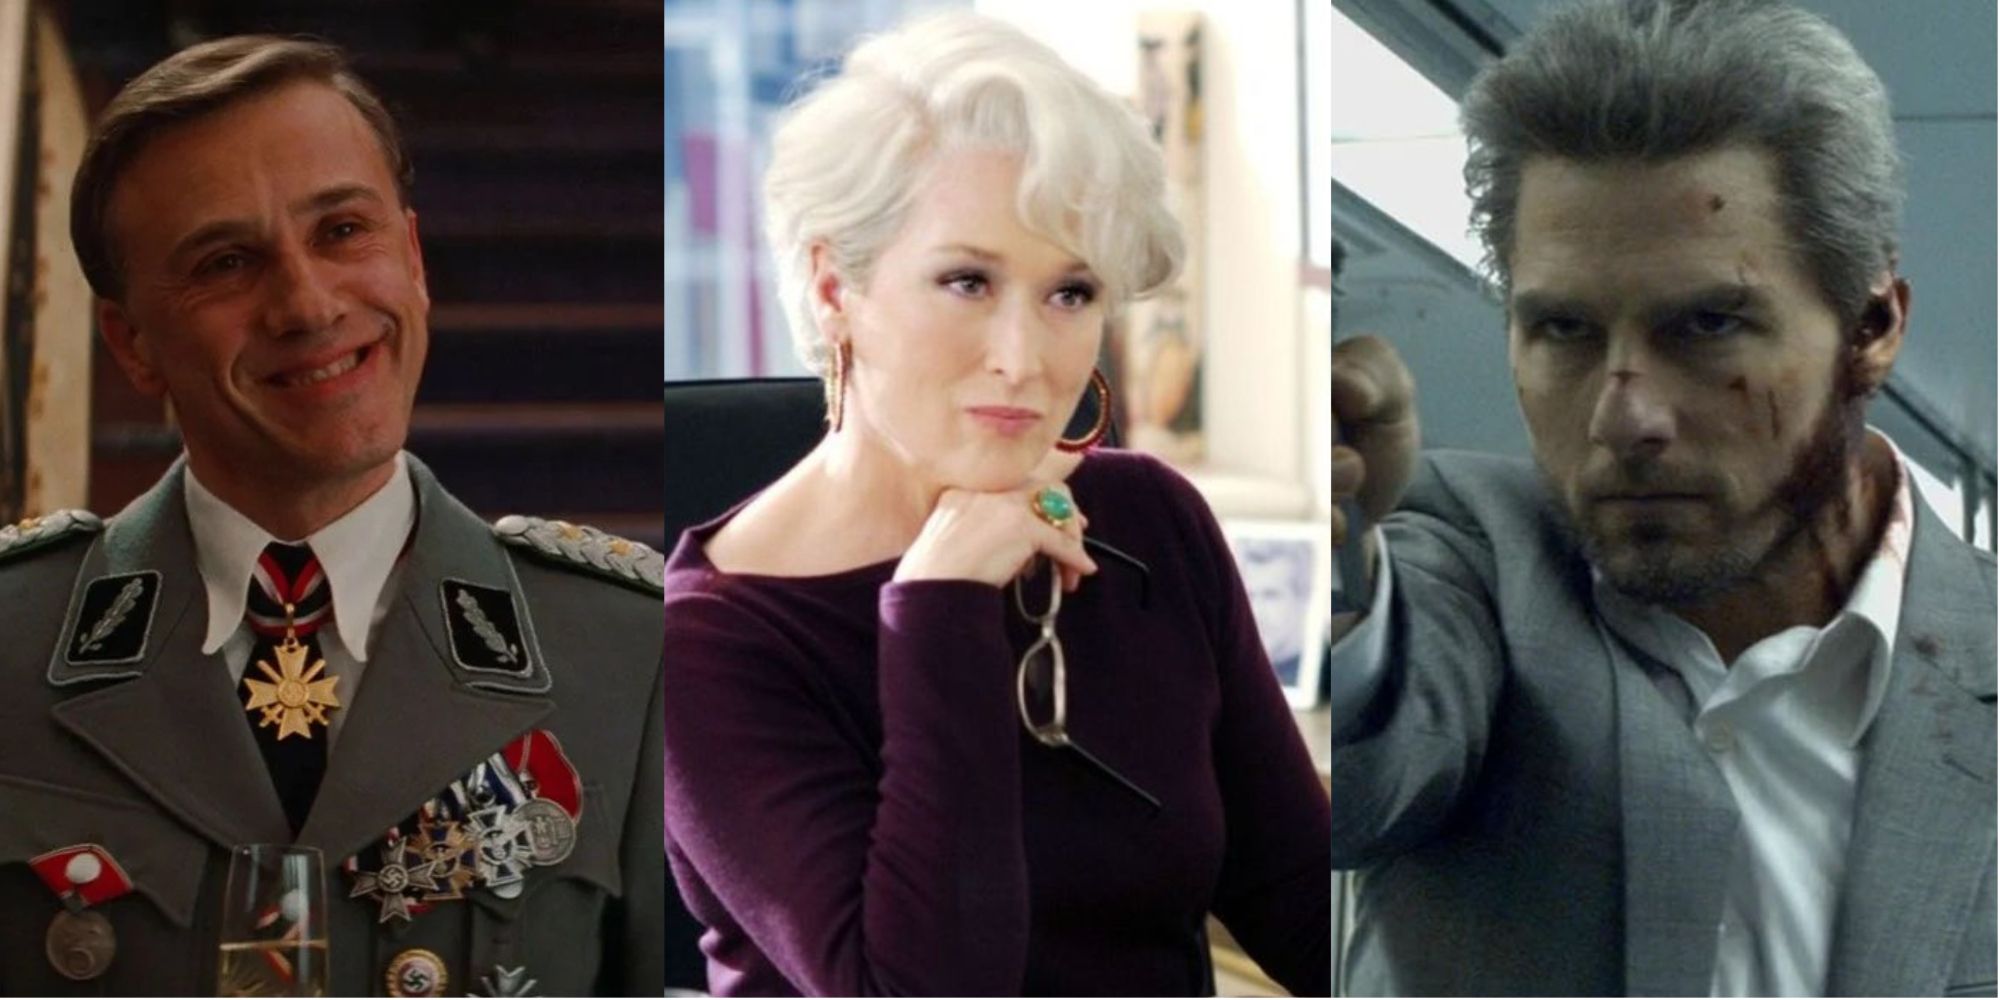 A split image of antagonists from Collateral, The Devil Wears Prada, and Inglorious Basterds